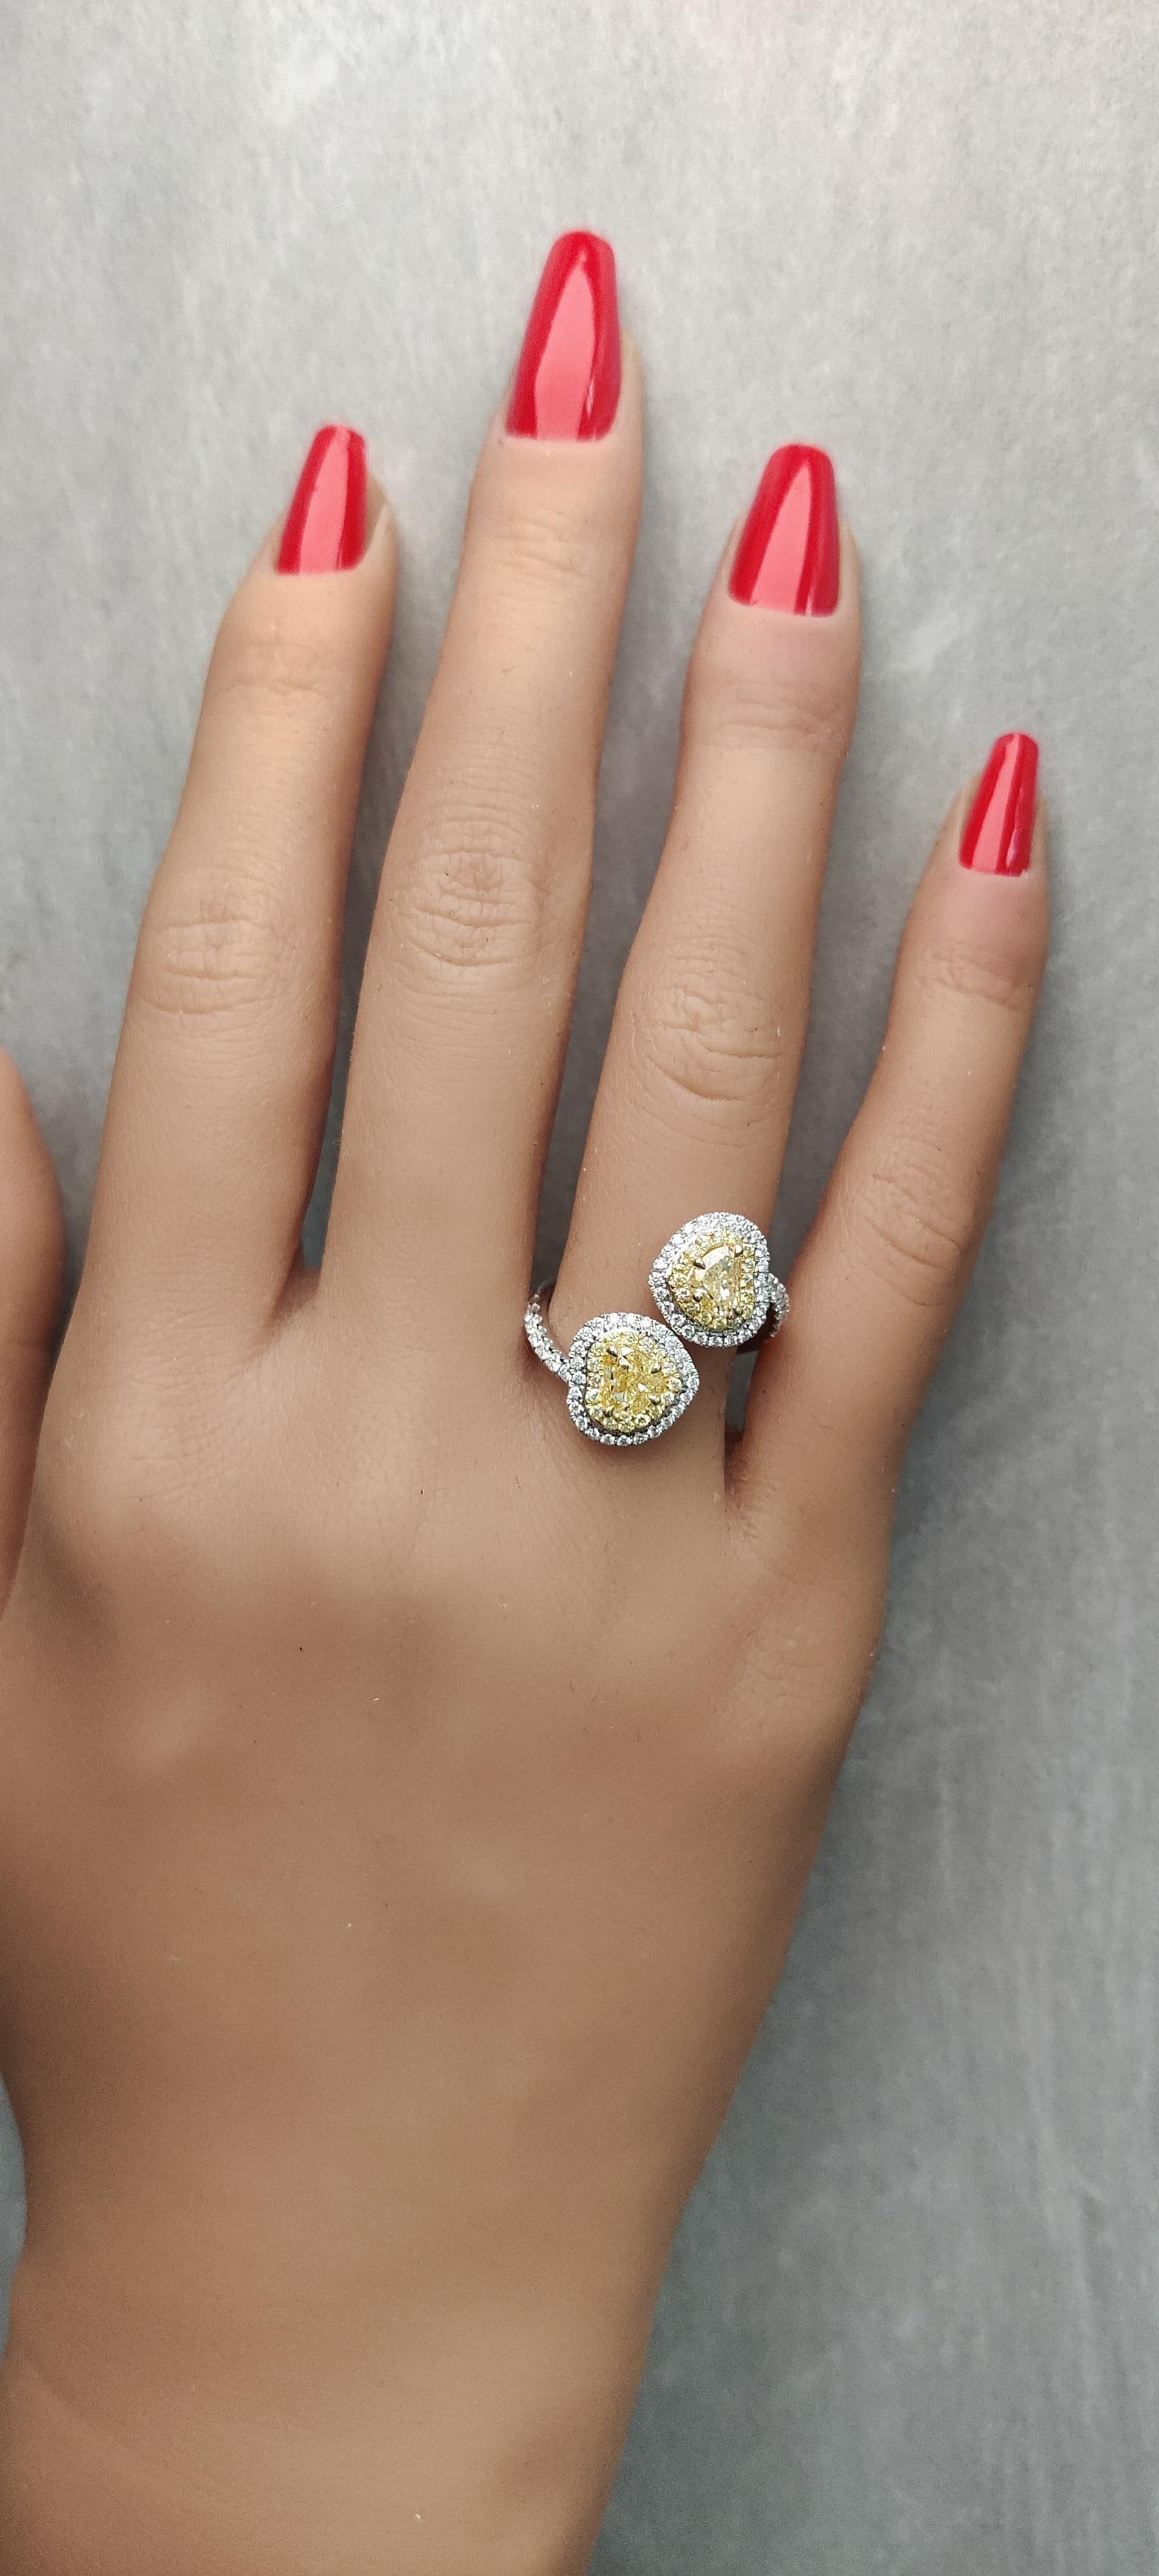 RareGemWorld's classic GIA certified diamond ring. Mounted in a beautiful 18K Yellow and White setting with two natural heart cut yellow diamonds. The yellow diamonds are surrounded by round natural white diamond melee and round natural yellow